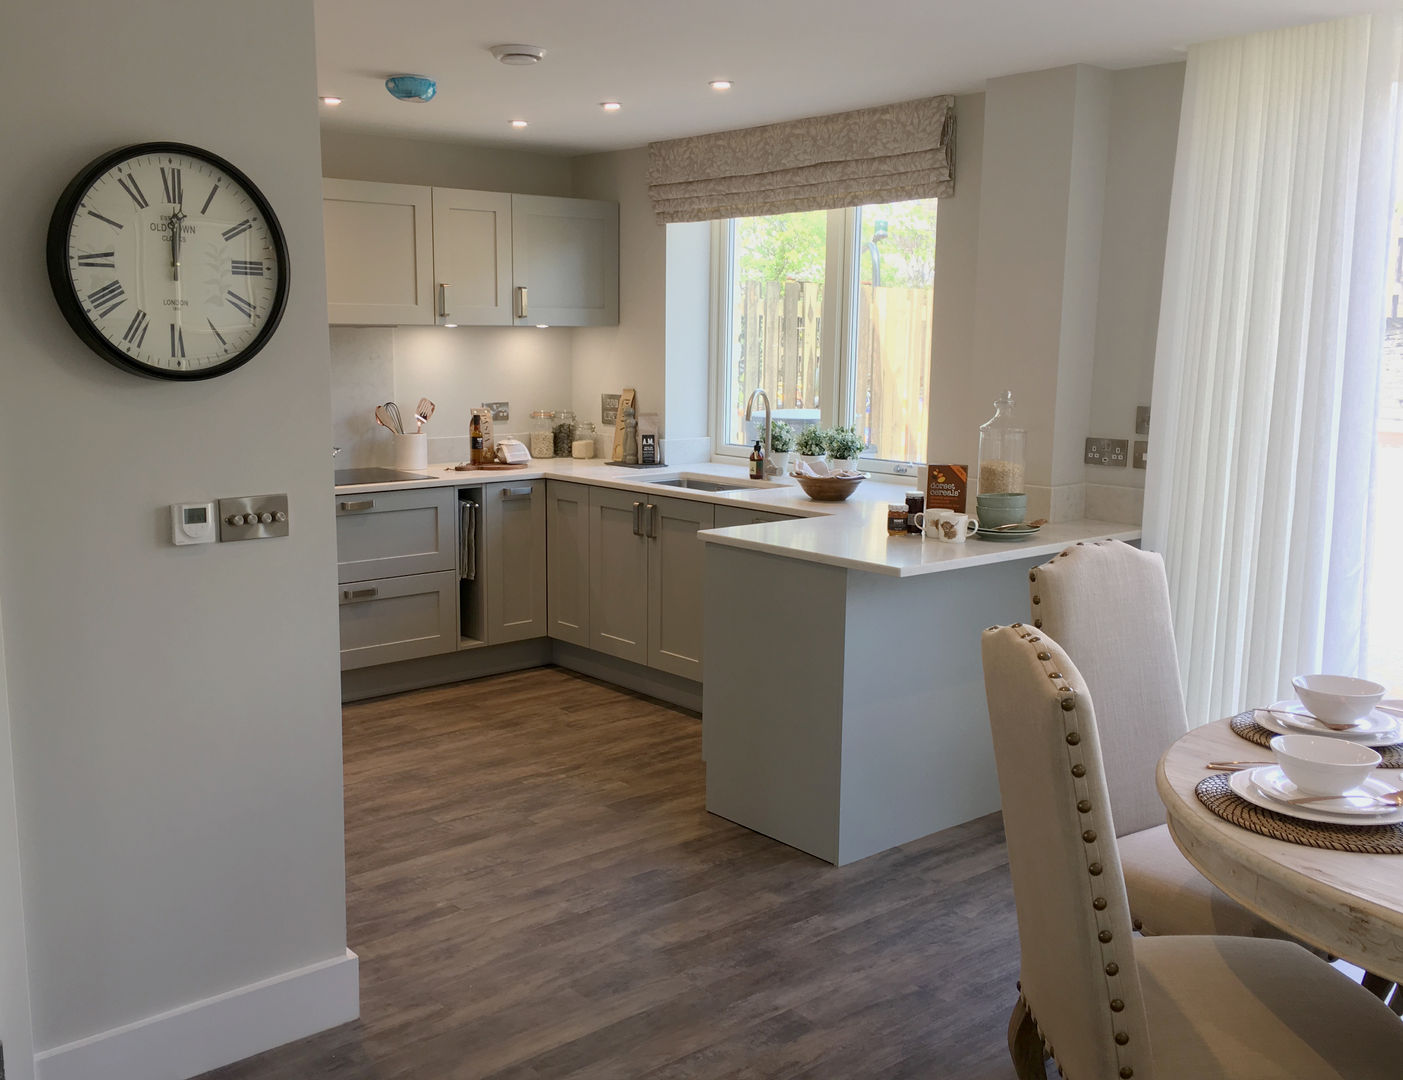 Painted kitchen Greengage Interiors Built-in kitchens Greengage